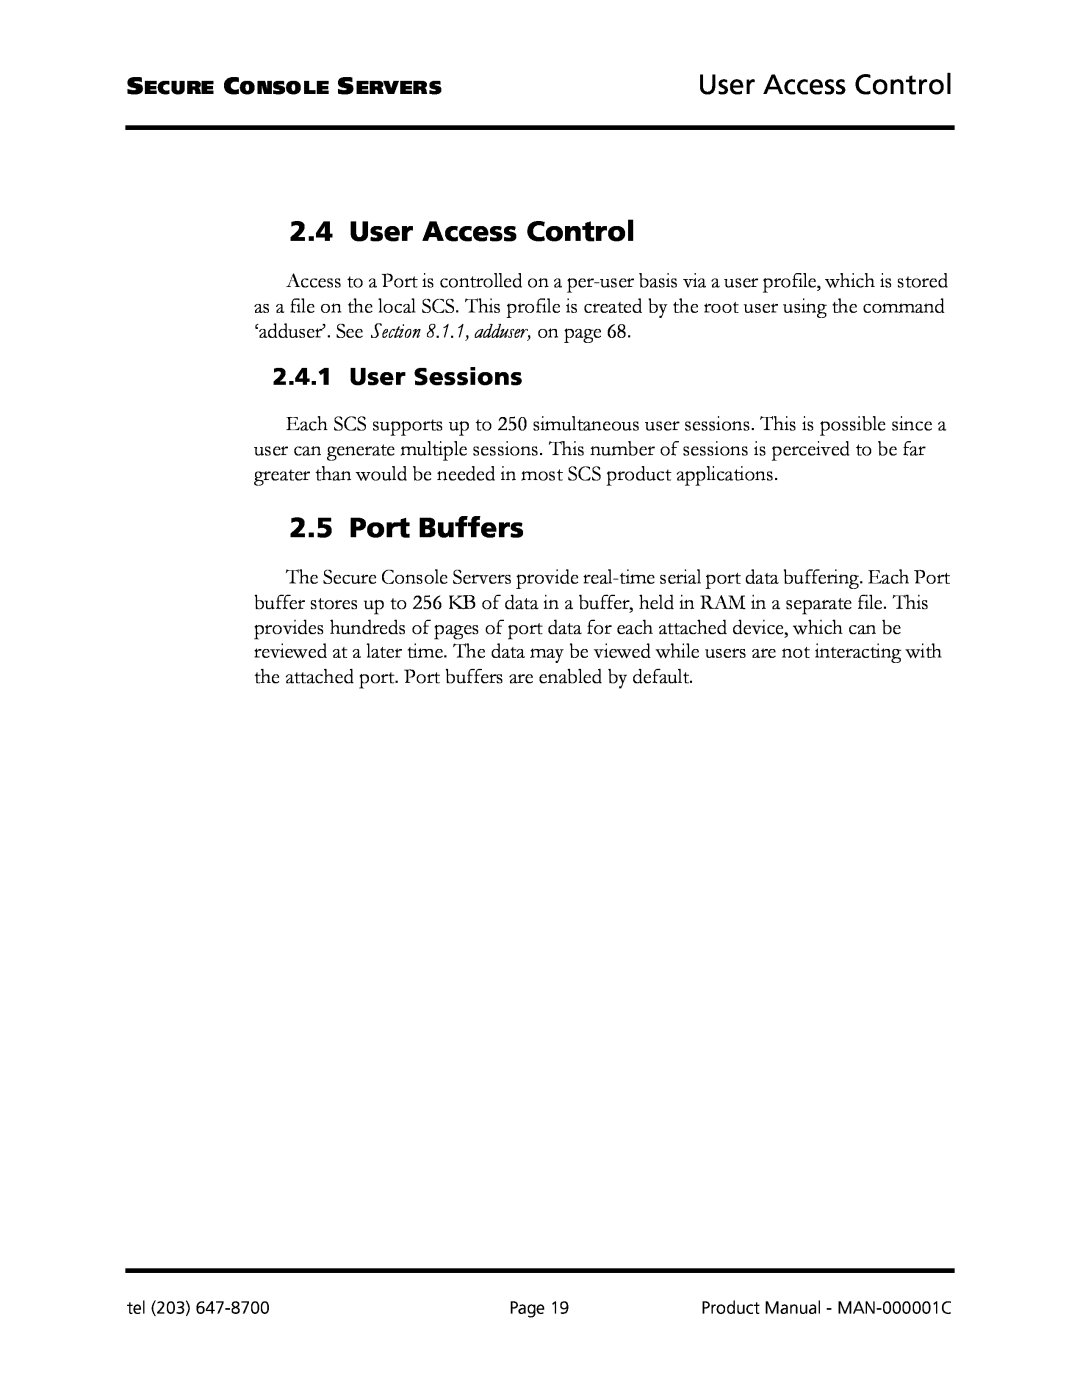 Logical Solutions SCS-R manual User Access Control, Port Buffers, User Sessions 